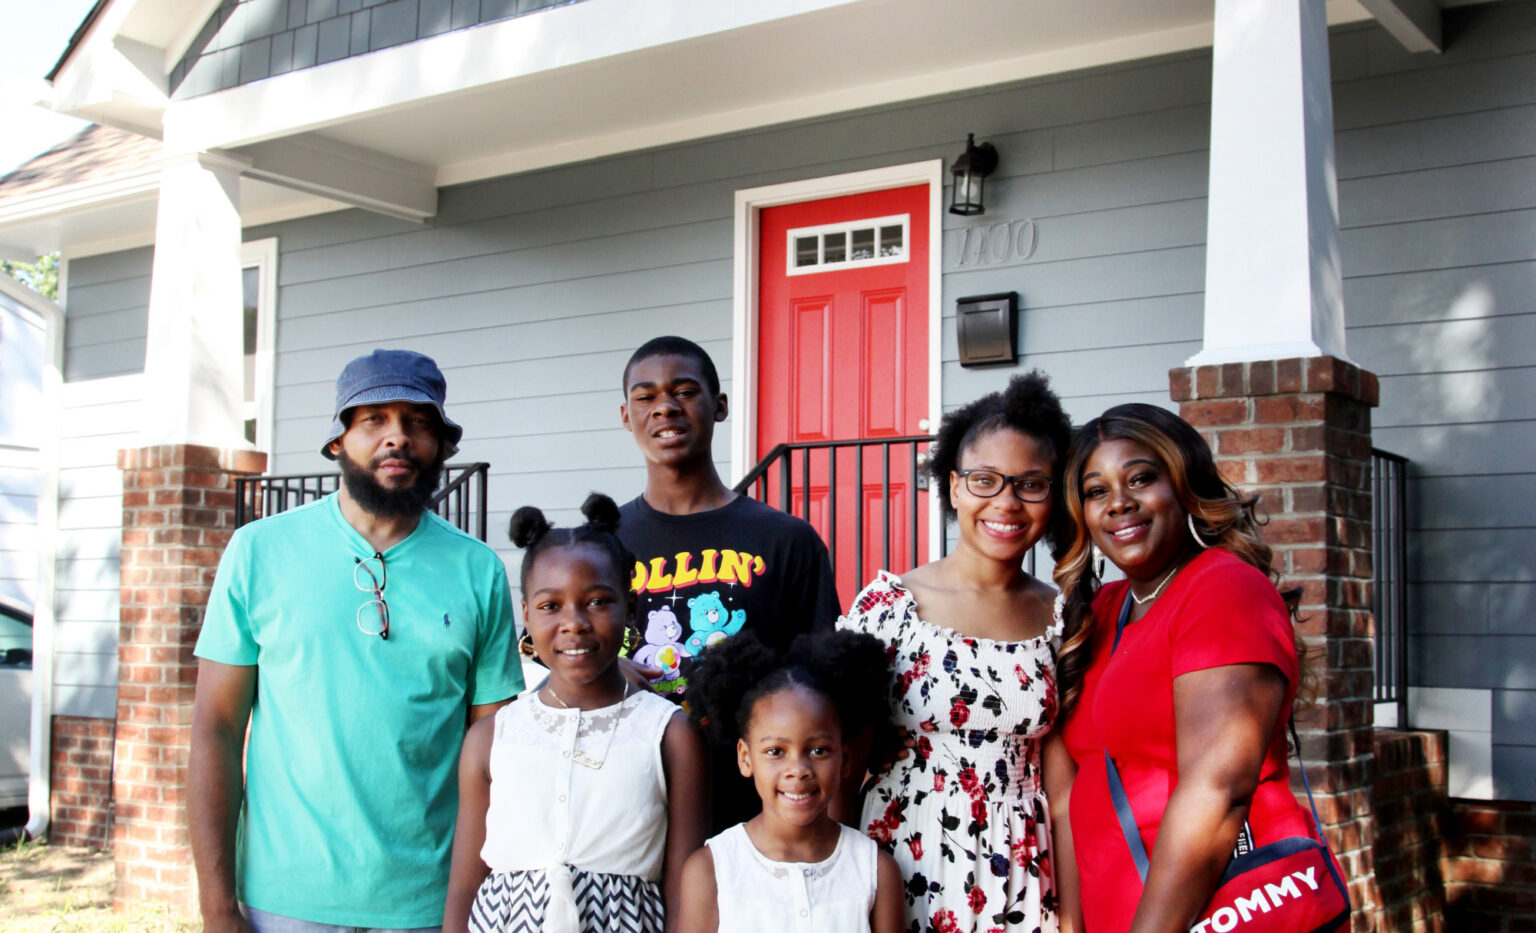 The Adams family standing in front of their new home built by the Richmond Metropolitan Habitat for Humanity. This photo was sourced from a BizSense article, courtesy of Rebecca D'Angelo.